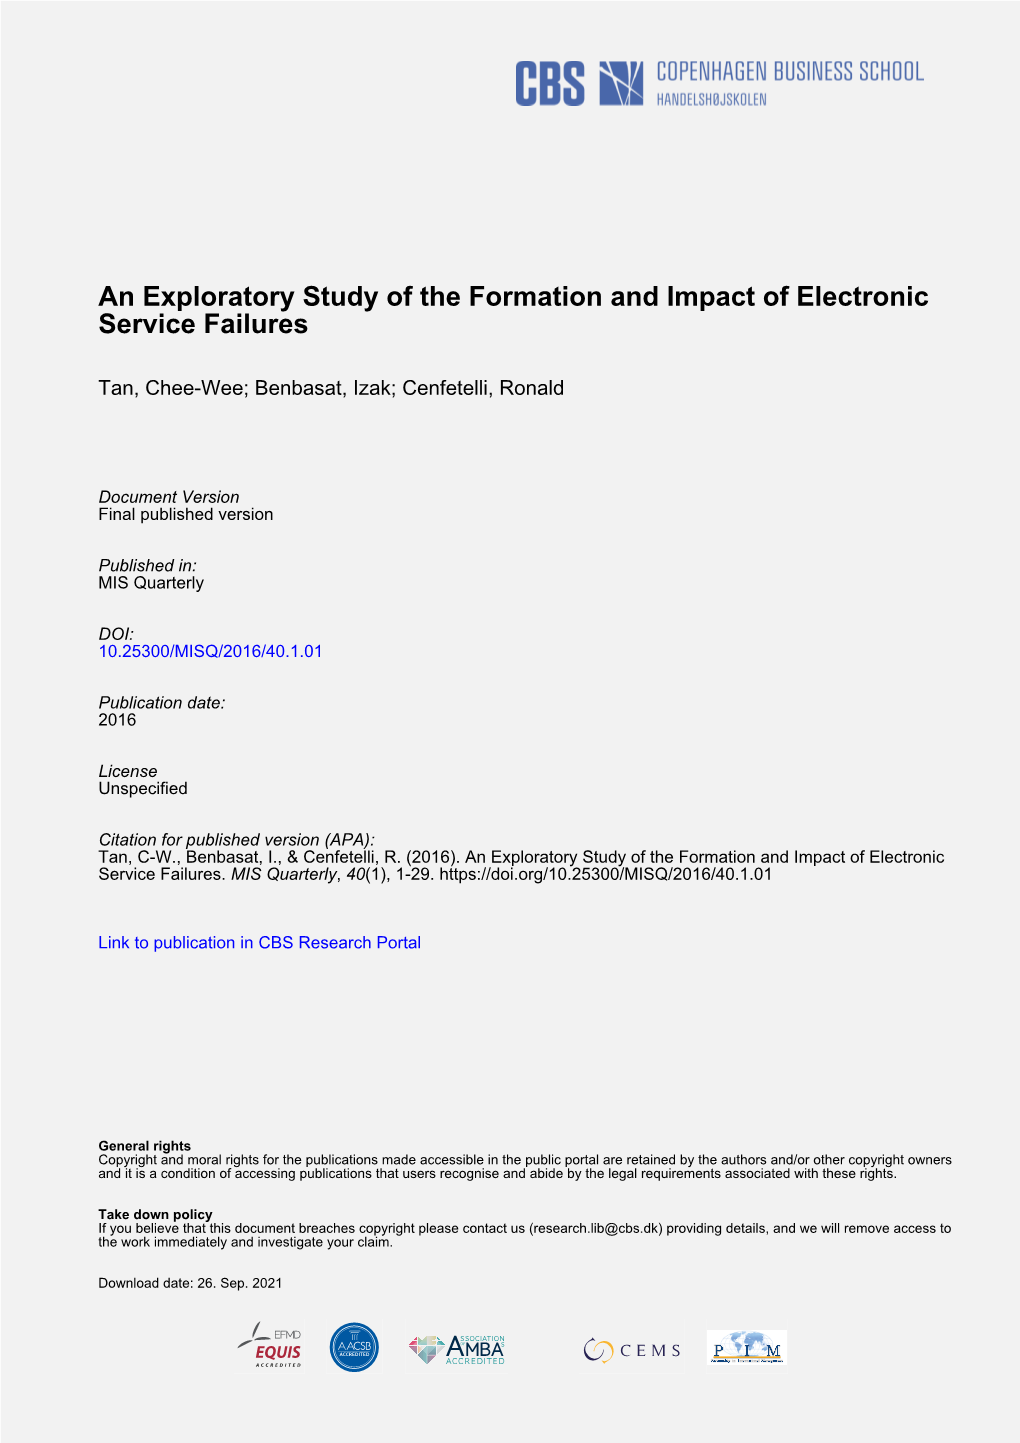 An Exploratory Study of the Formation and Impact of Electronic Service Failures